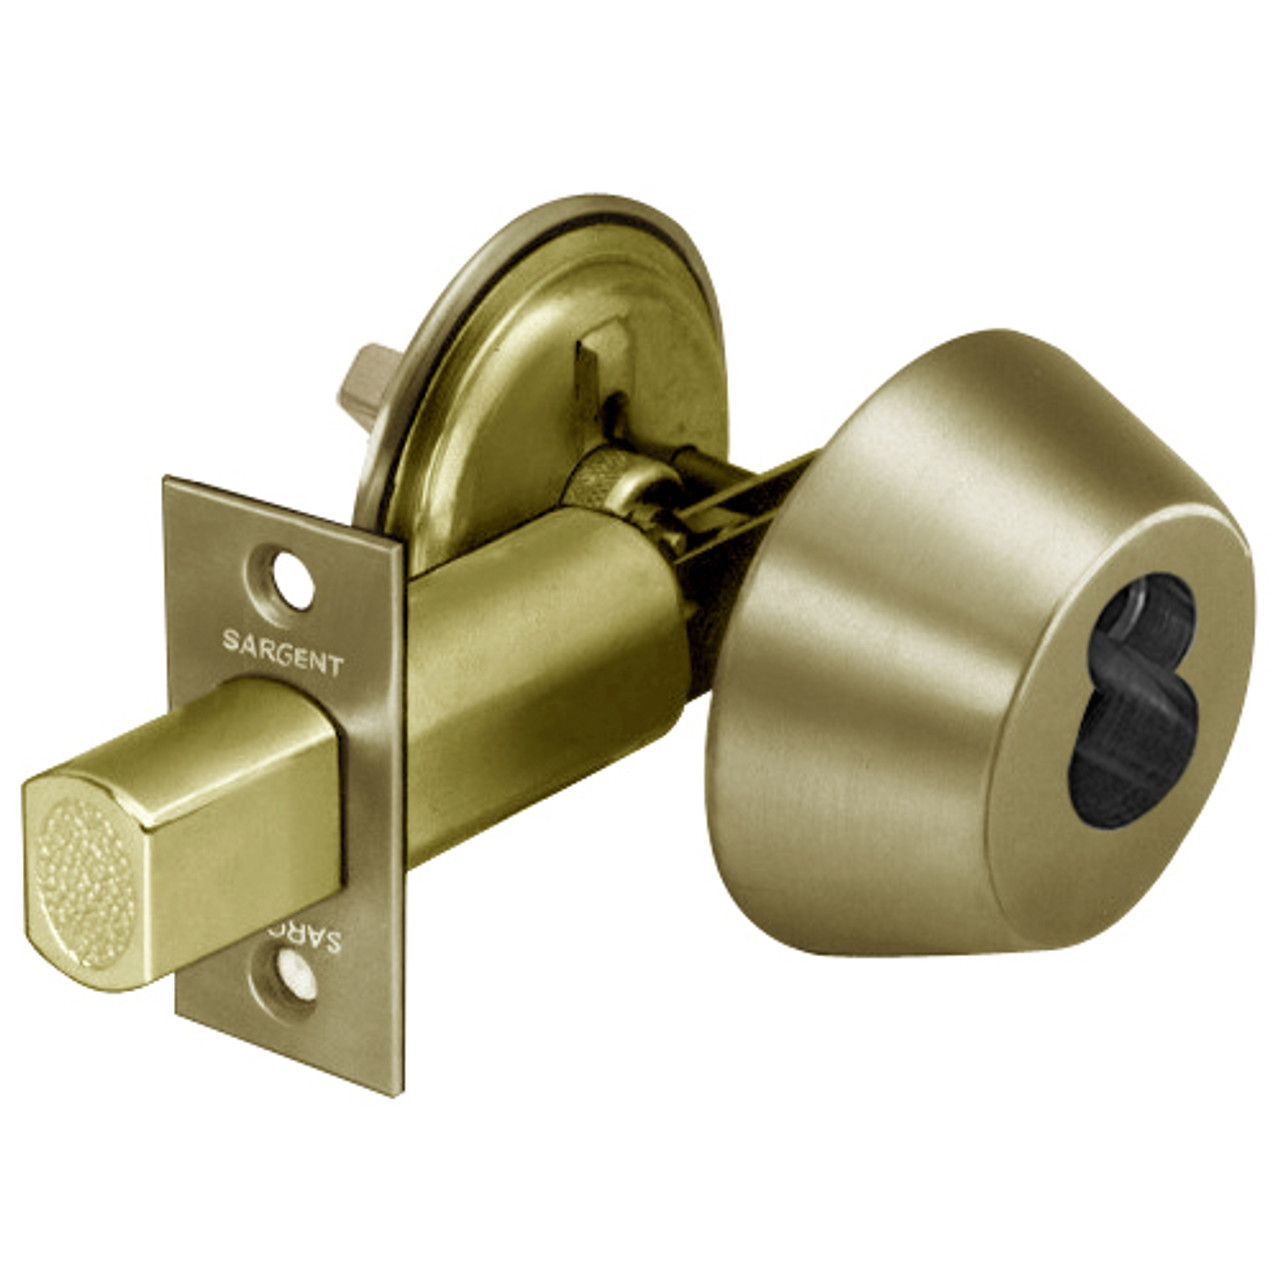 70-485-04 Sargent 480 Series Single Cylinder Auxiliary Deadbolt Lock with Thumbturn Prepped for SFIC in Satin Brass